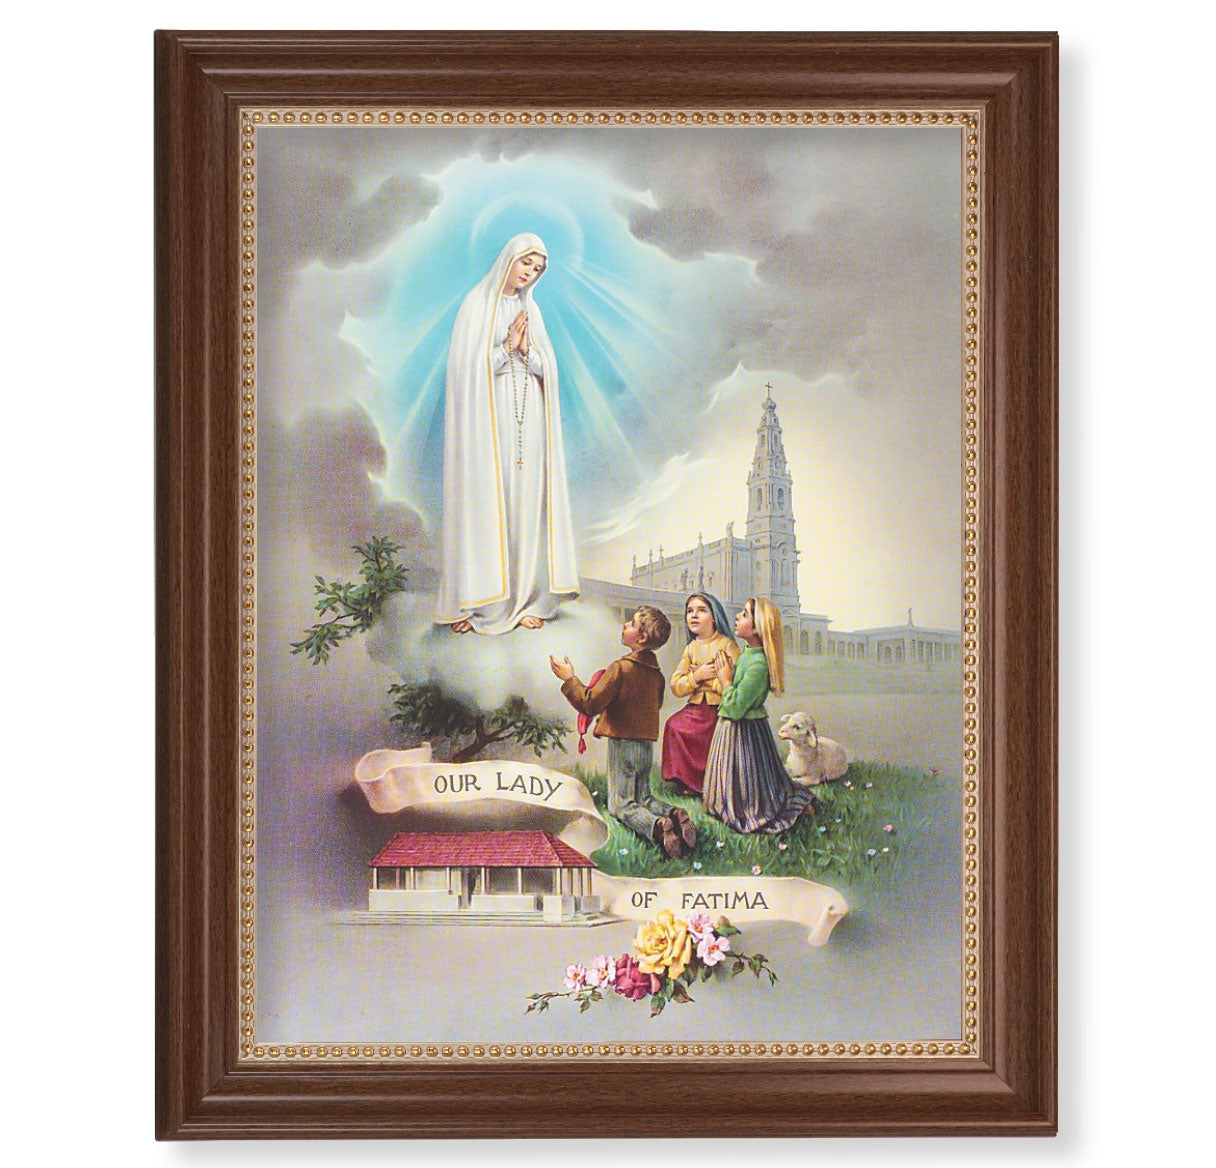 Our Lady of Fatima Picture Framed Wall Art Decor Extra Large, Classic Dark Walnut Finished Frame with Gold Beaded Lip